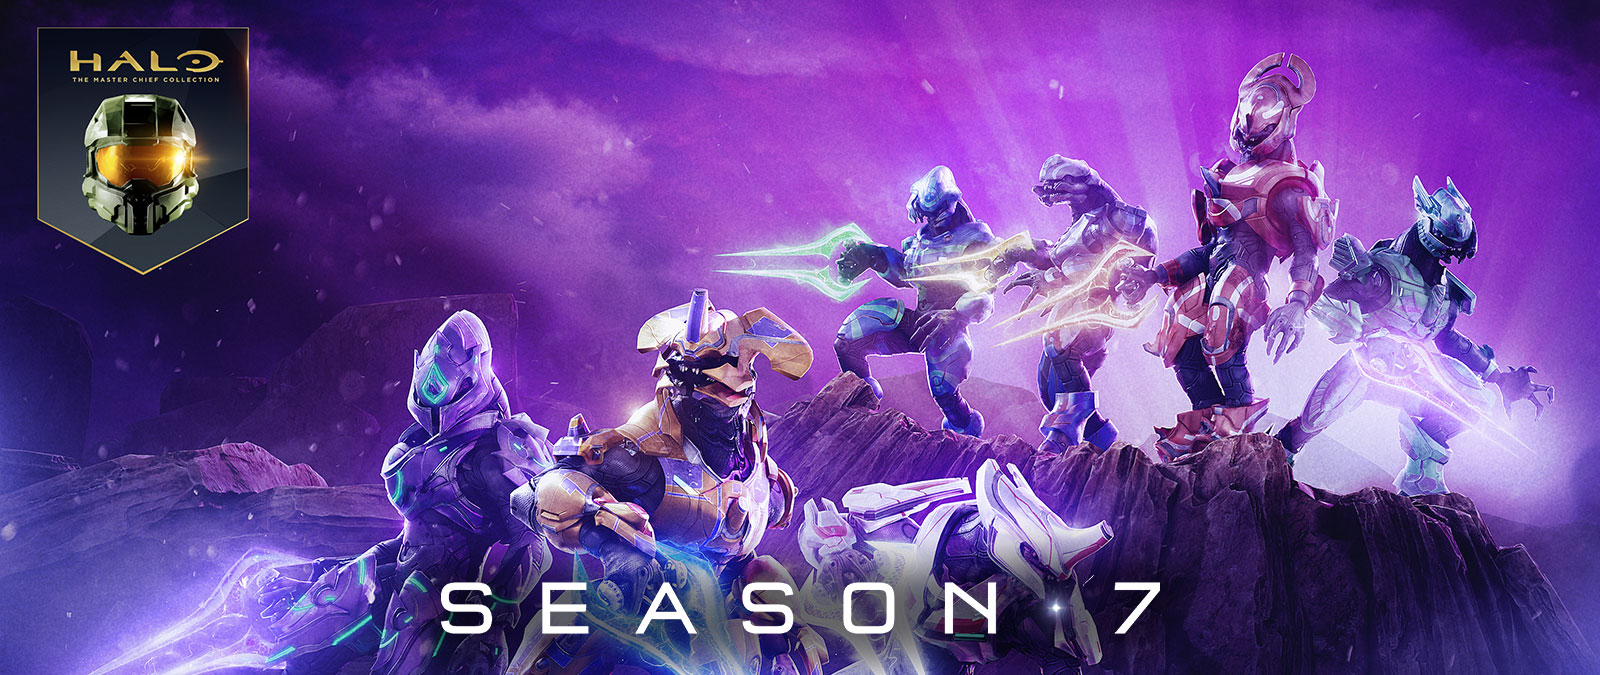 Halo: The Master Chief Collection, Season 7, Multiple Elites pose wearing different armour and holding differently coloured Energy Swords